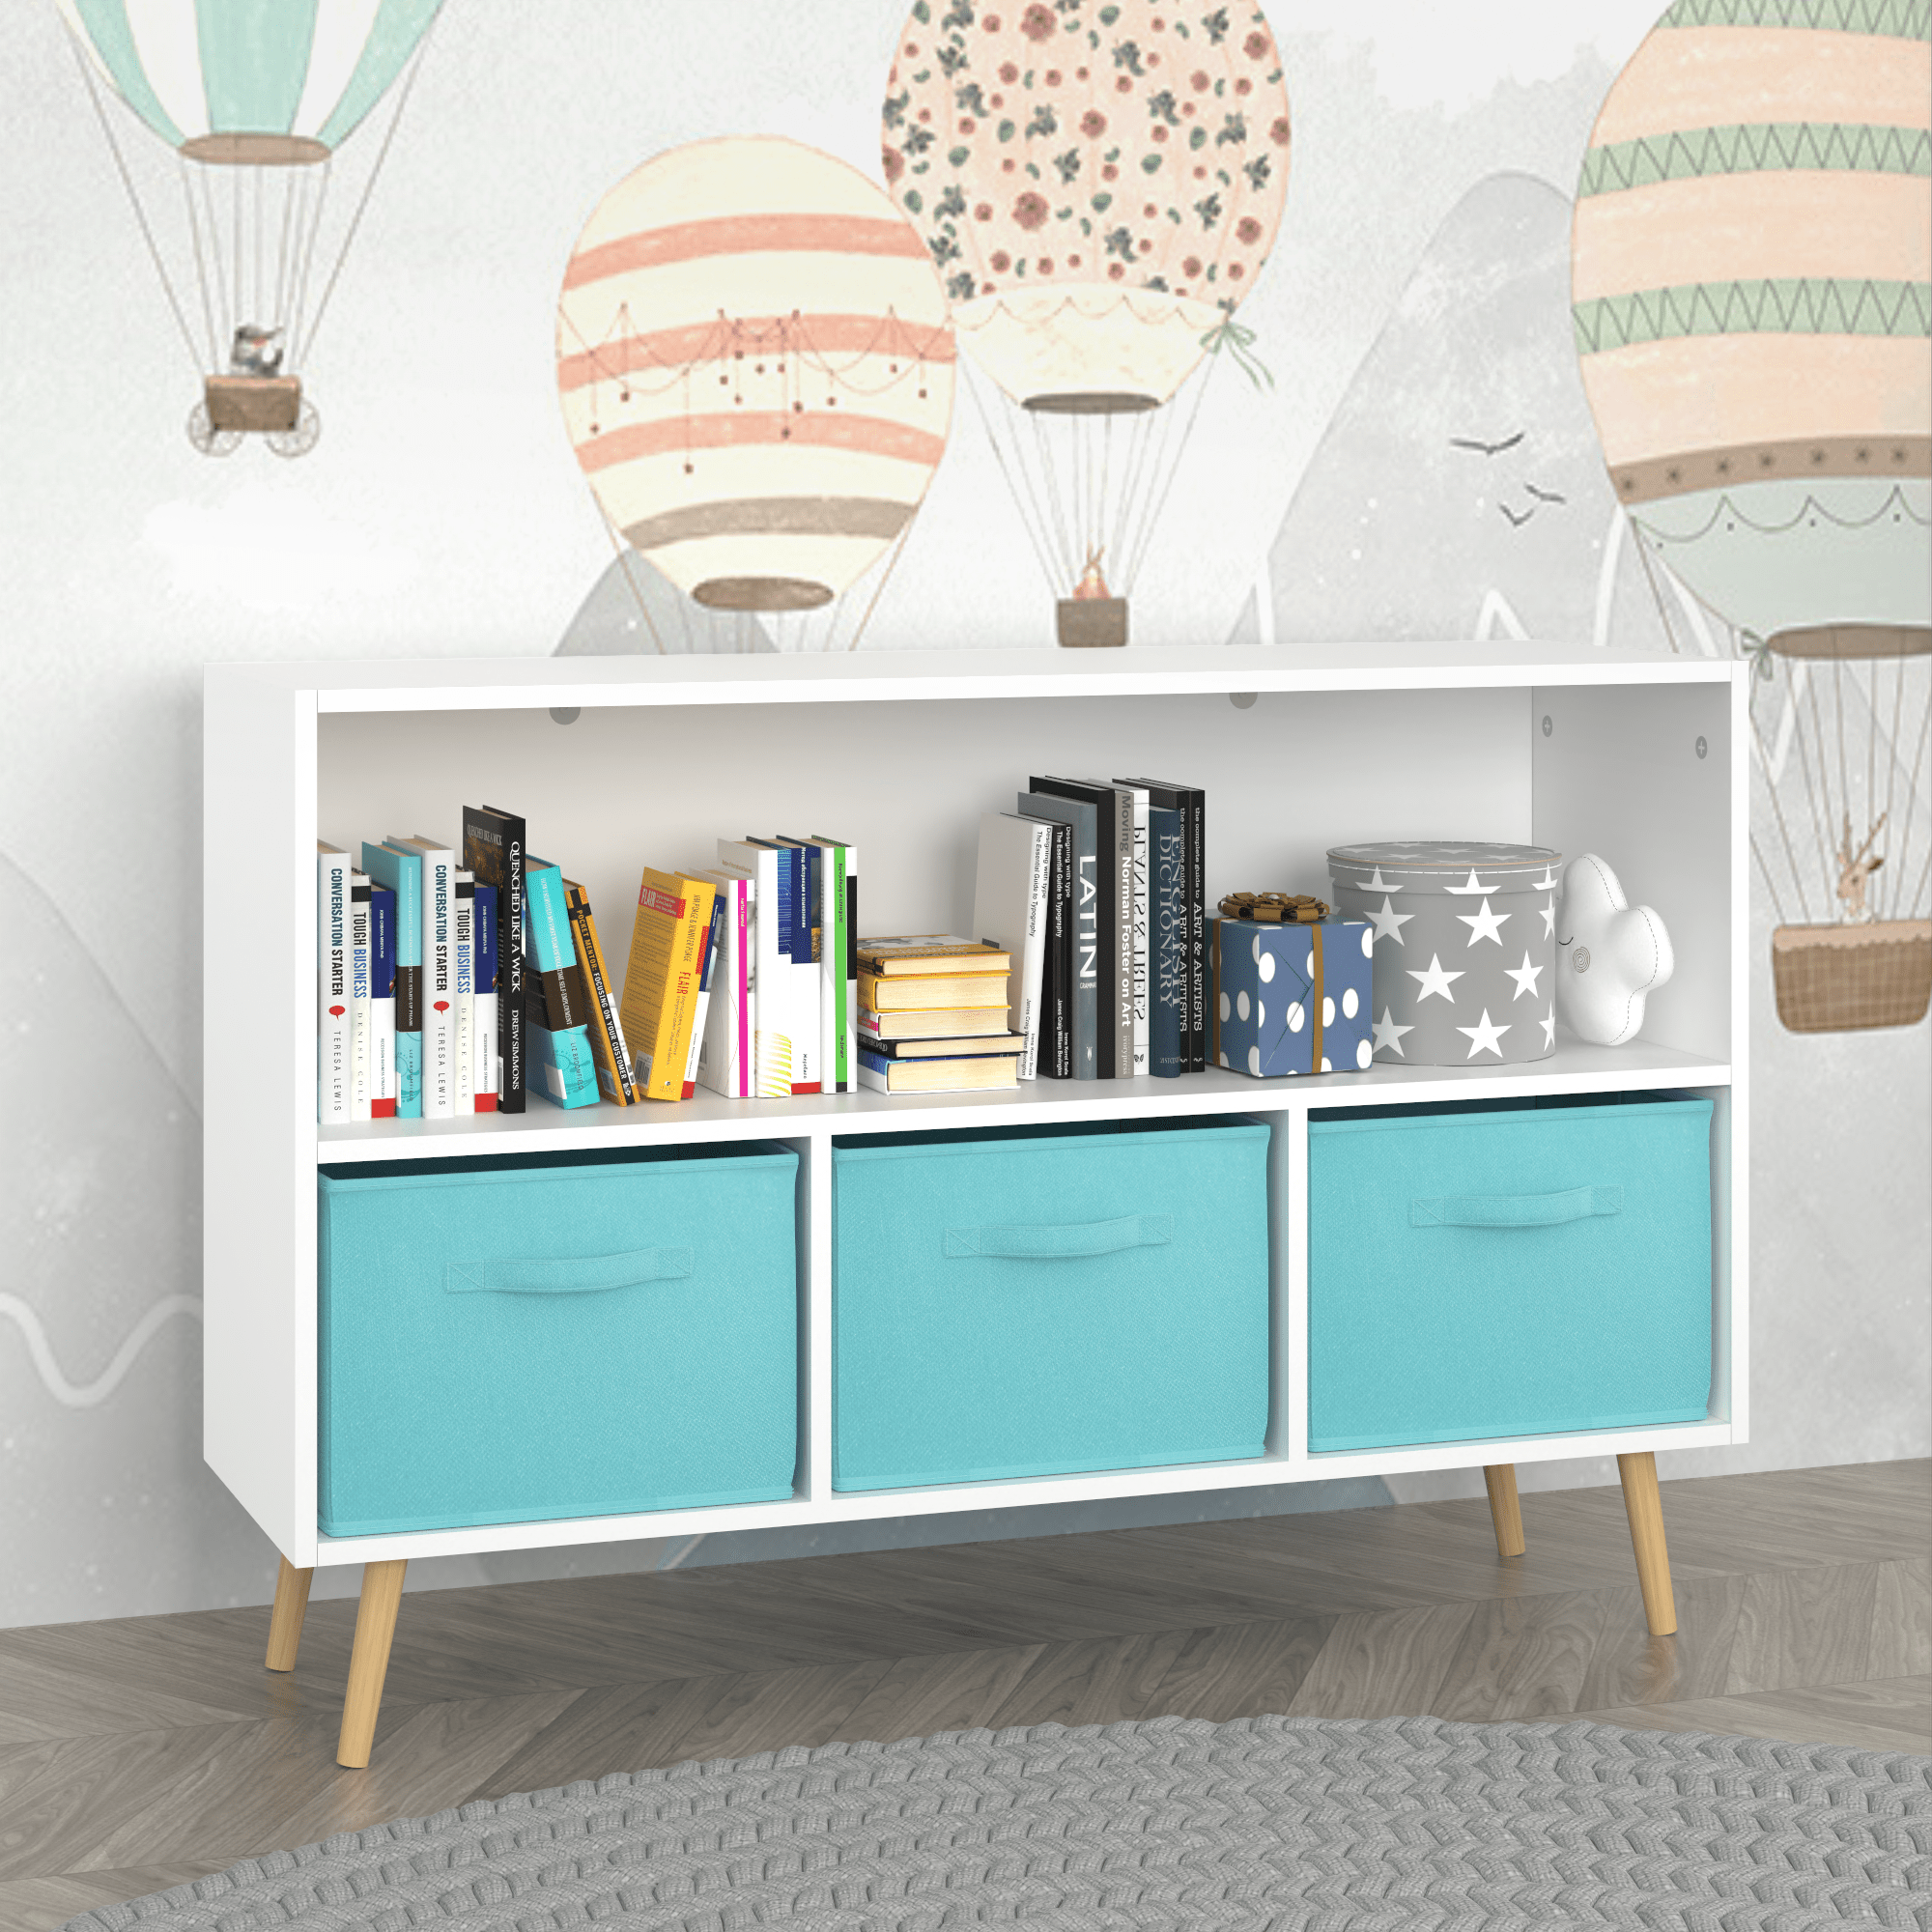 Kids bookcase with Collapsible Fabric Drawers, Children's Book Display, Toy Storage Cabinet Organizer, White/Blue